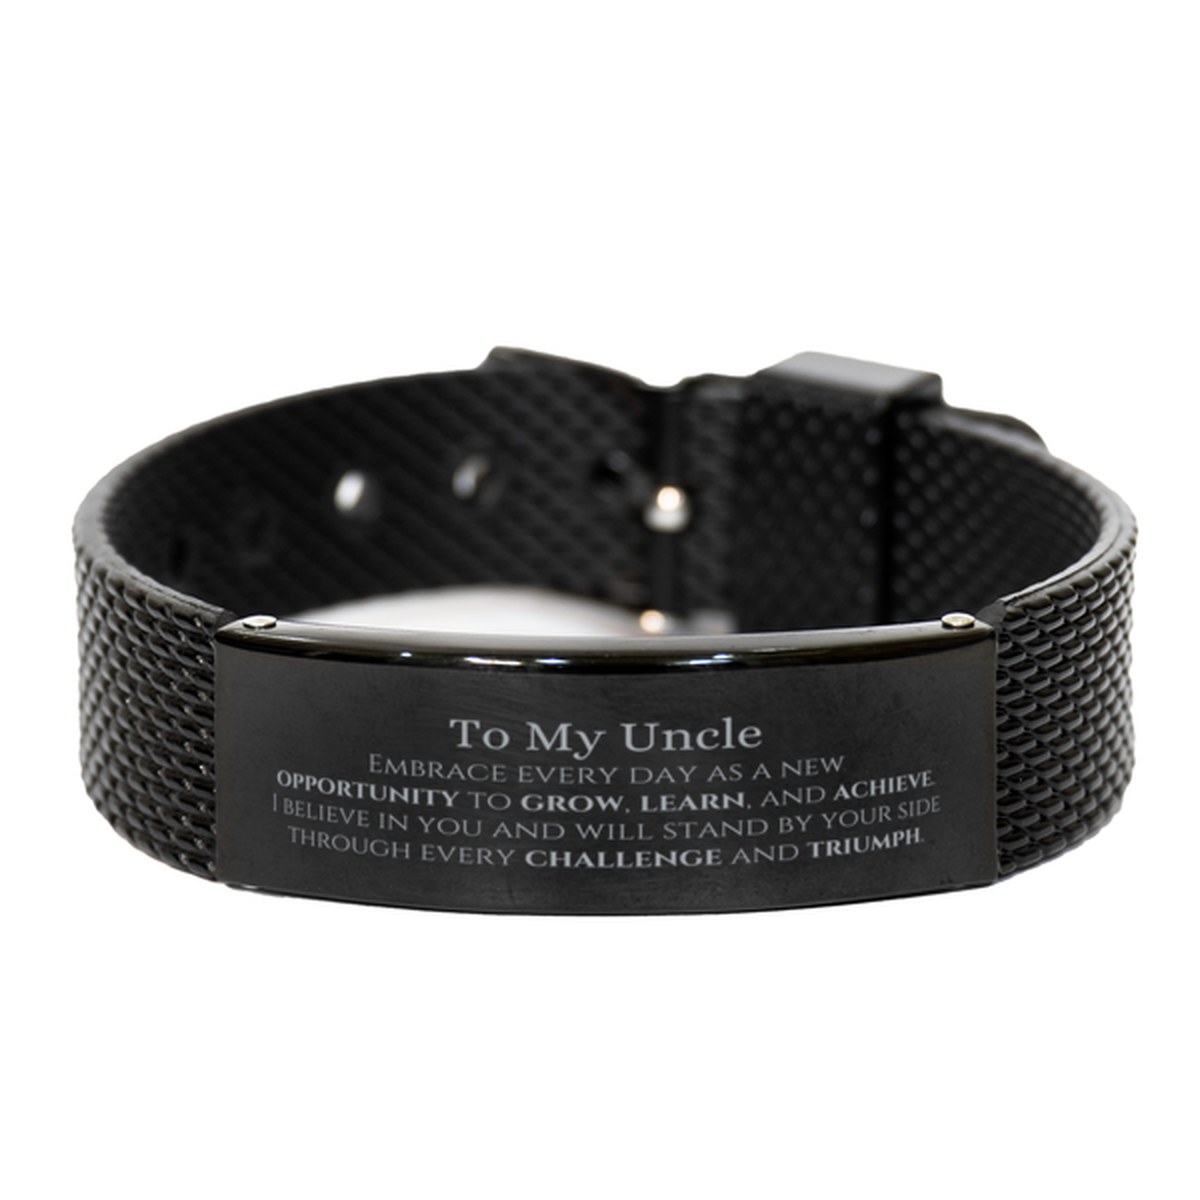 To My Uncle Gifts, I believe in you and will stand by your side, Inspirational Black Shark Mesh Bracelet For Uncle, Birthday Christmas Motivational Uncle Gifts